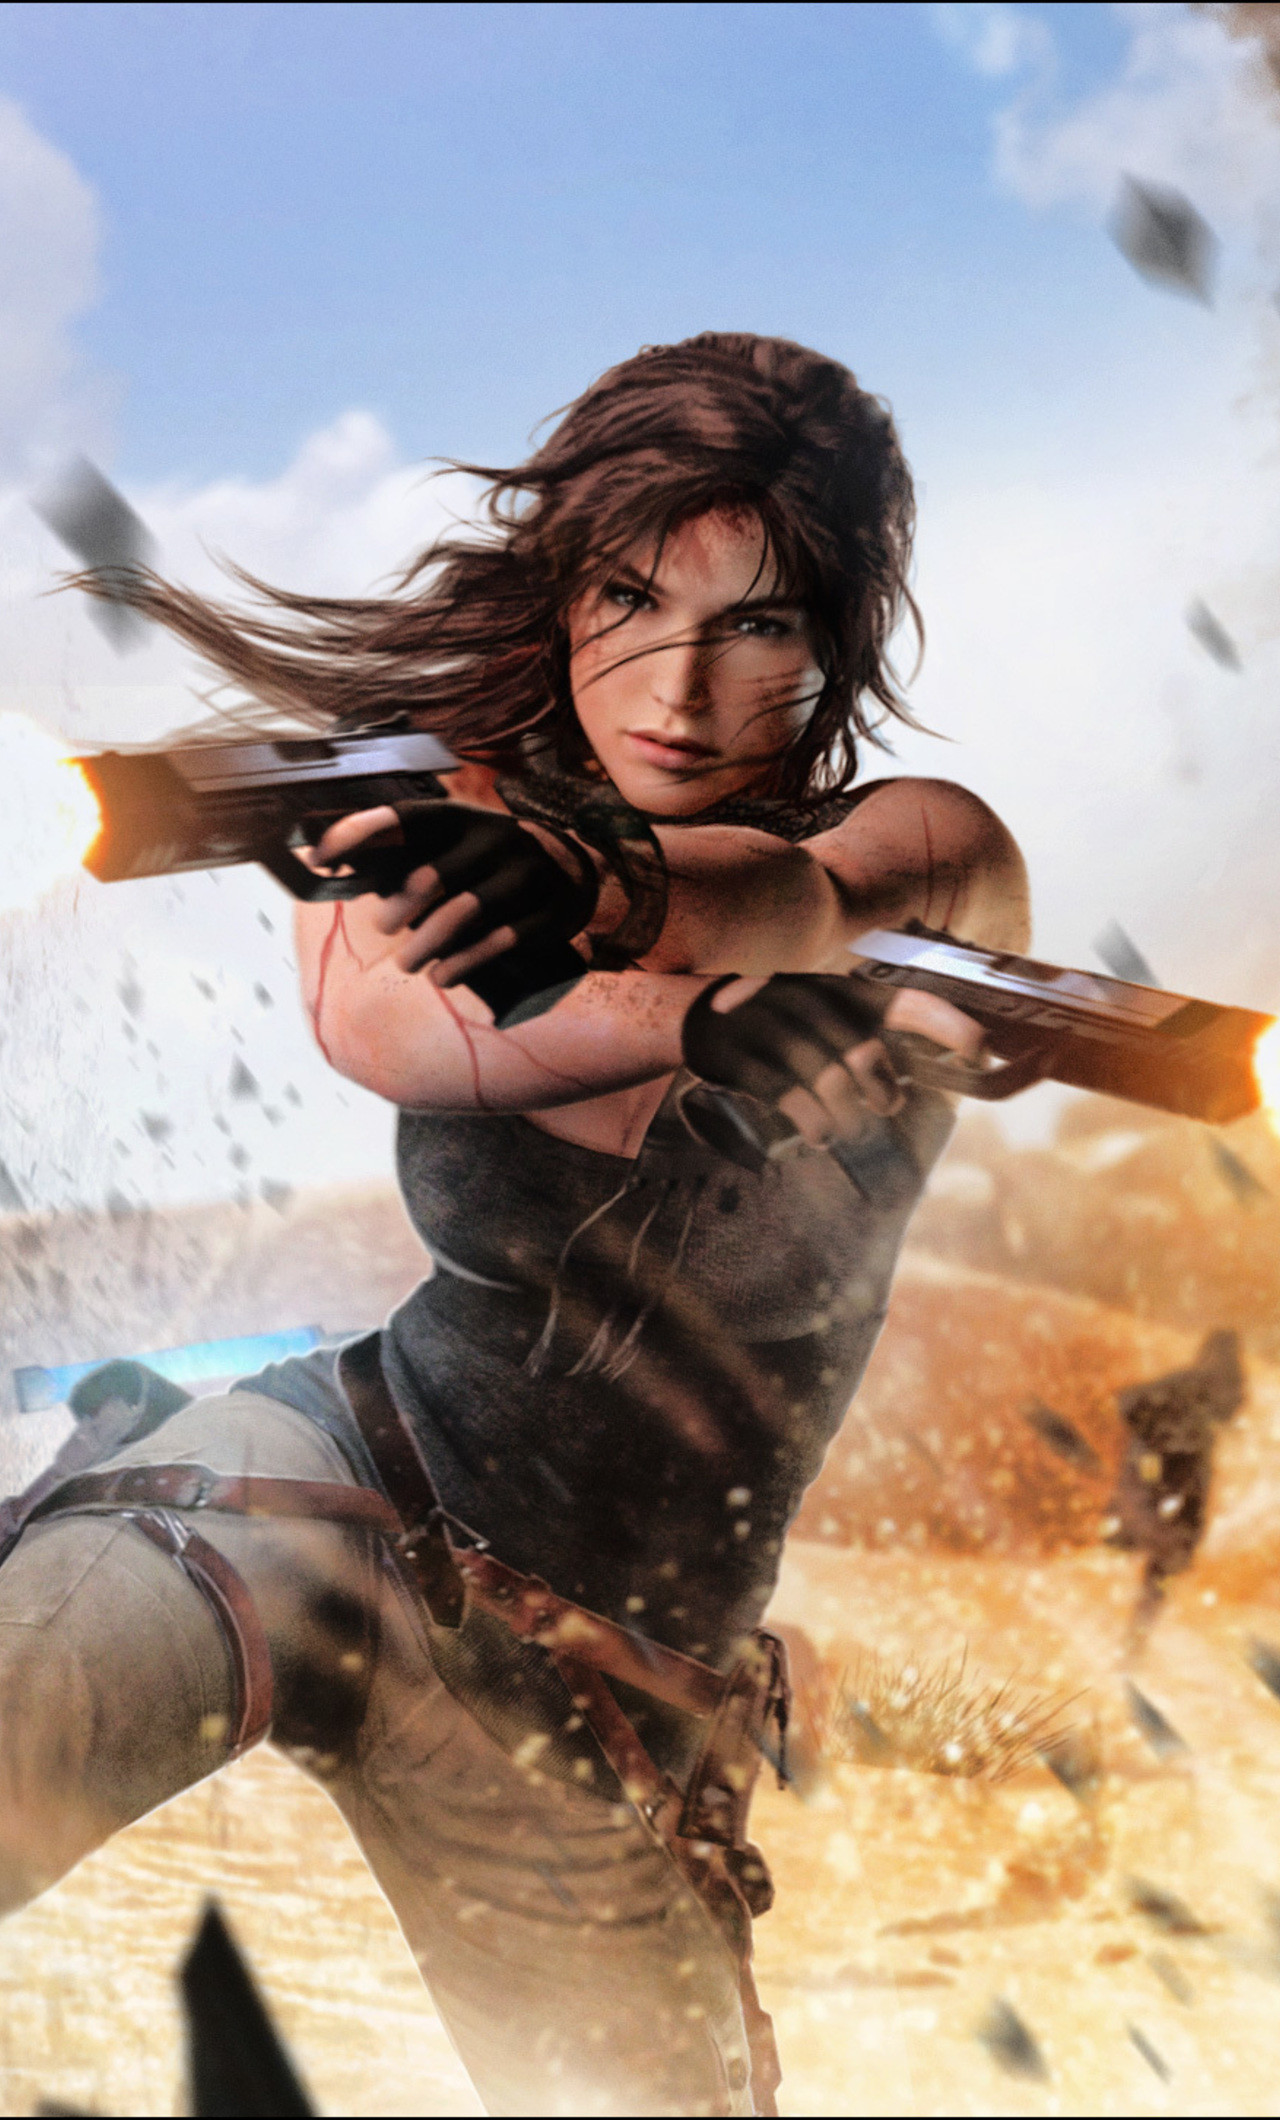 Rise Of The Tomb Raider Iphone Wallpapers